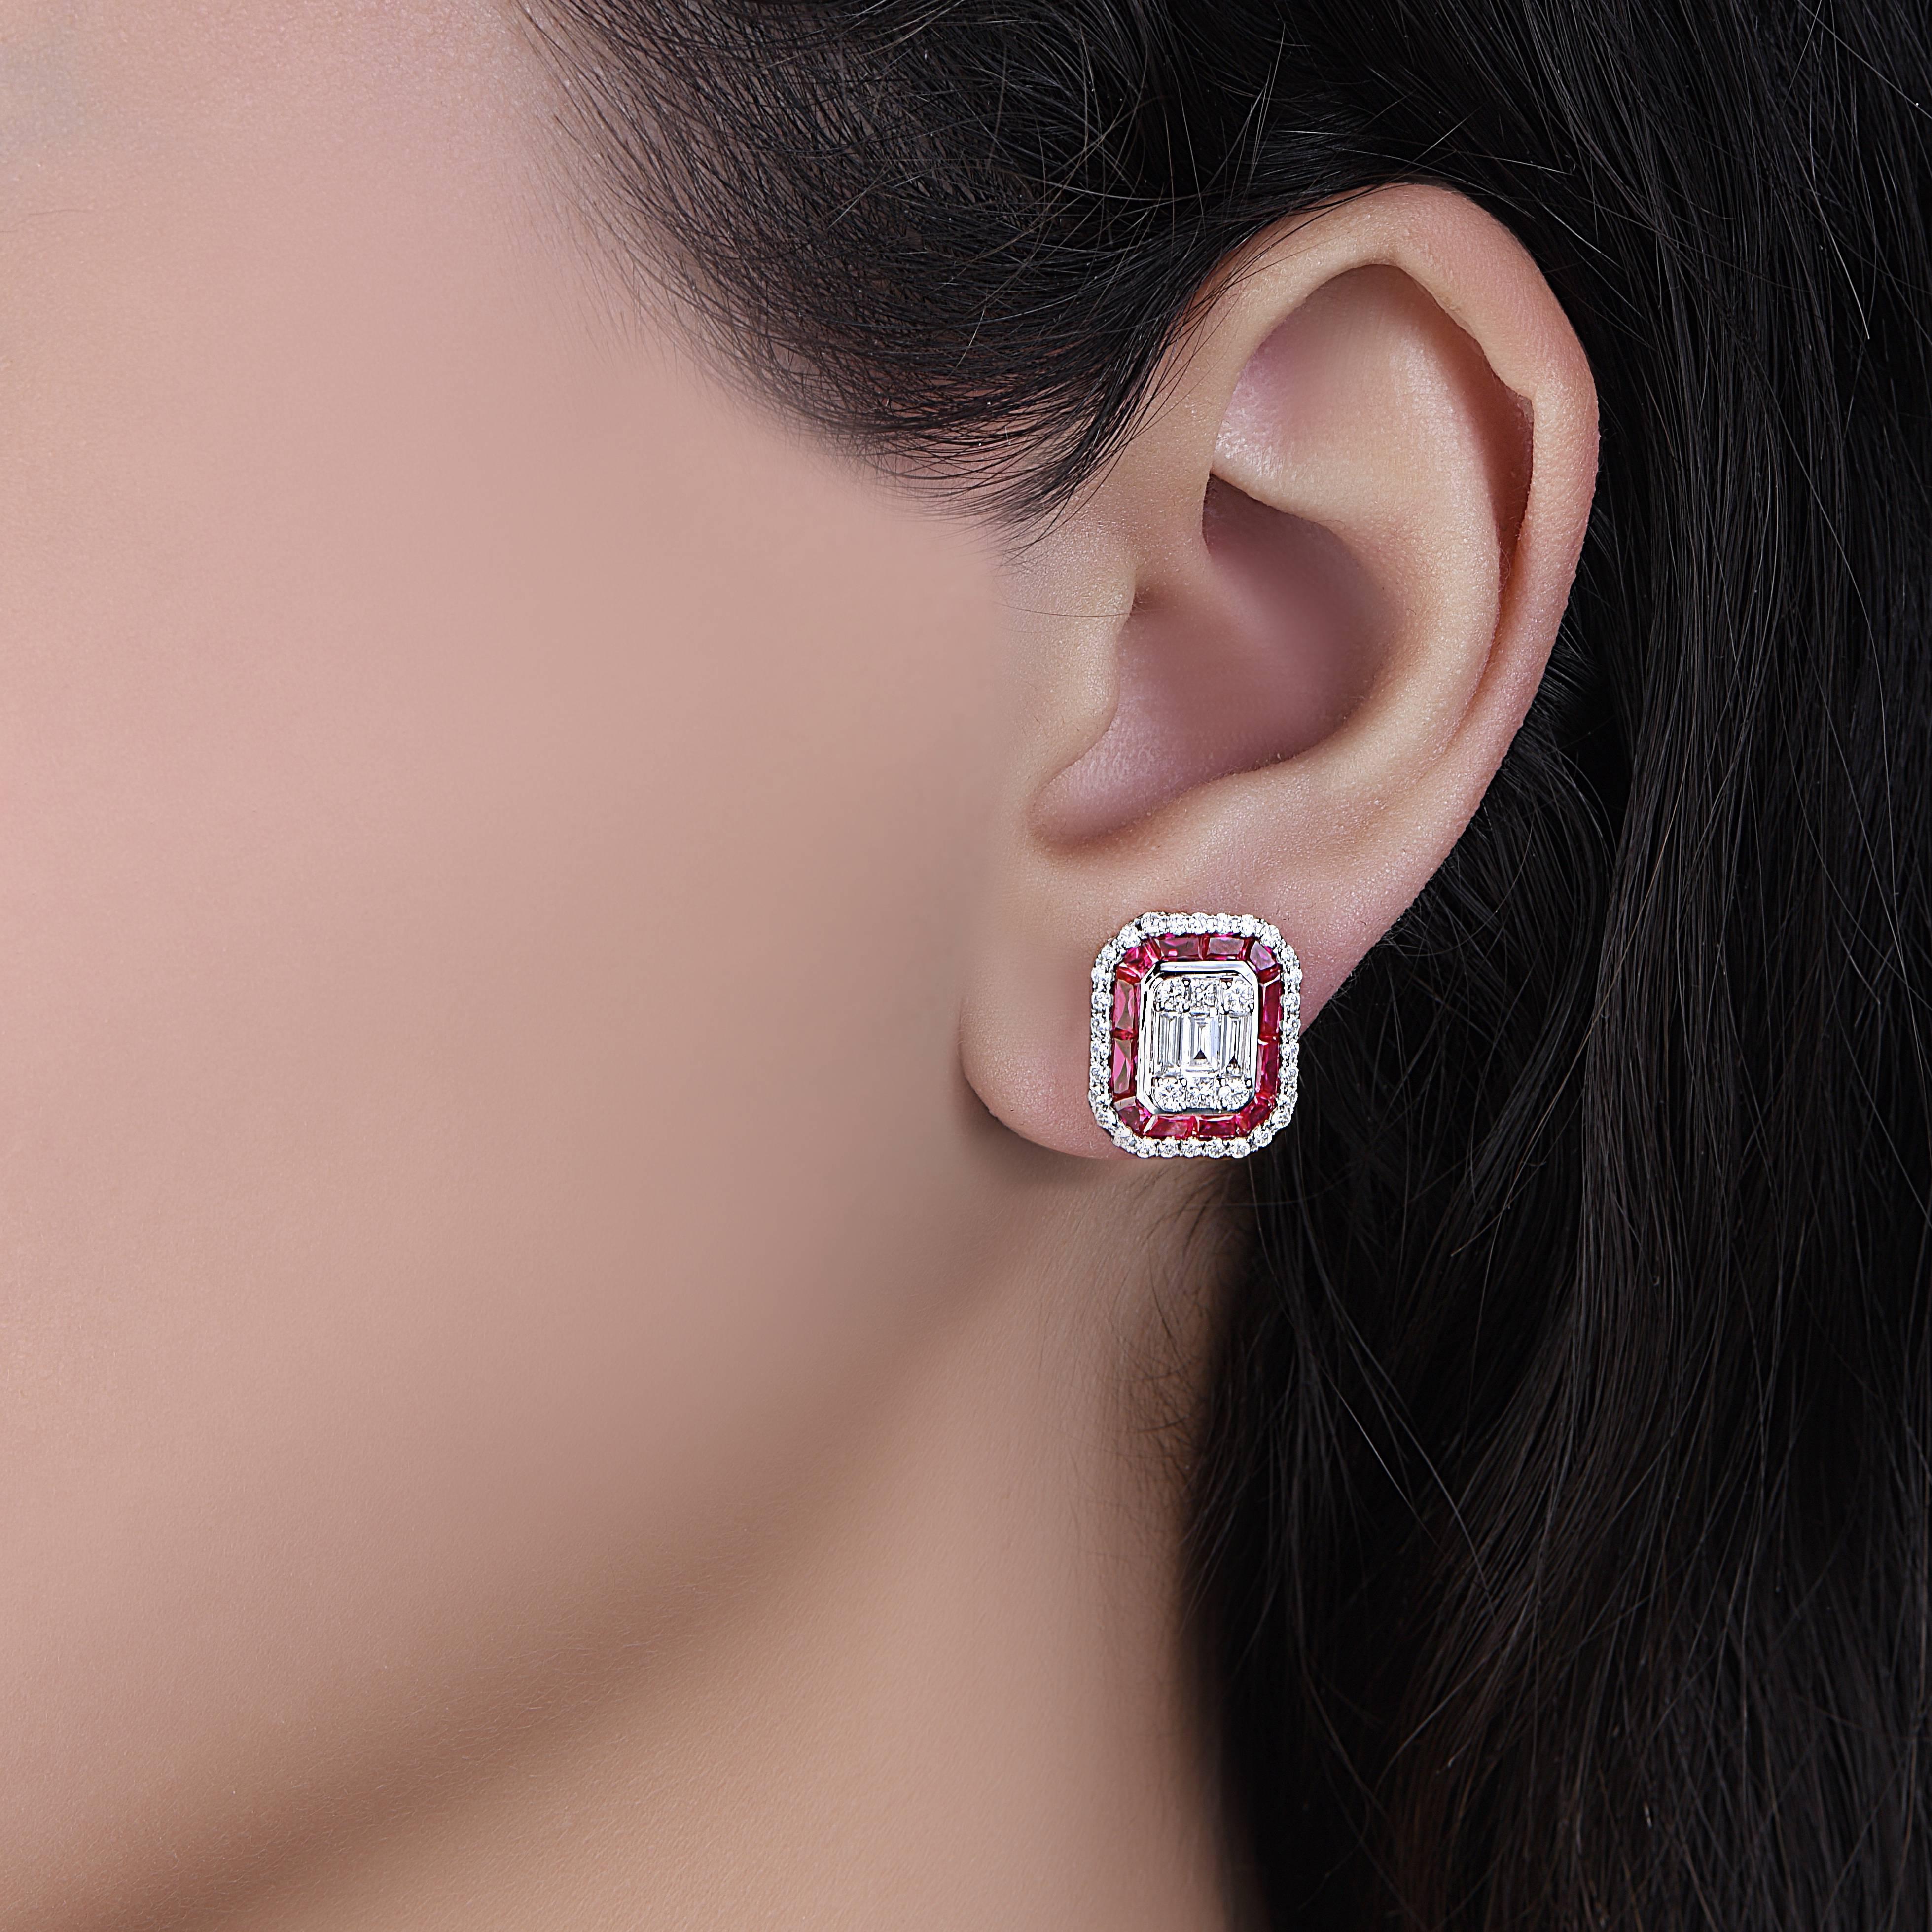 Approx total weight:3.45ct
Rubies: Gorgeous Rich blood red 2.26ct
Diamond weight: 1.19ct
Diamond Color: E-F
Diamond Clarity: Vvs 
Cut: Excellent 
As noted we are vetted and rated a Top Seller on 1stdibs falling into the top 25% of dealers listed